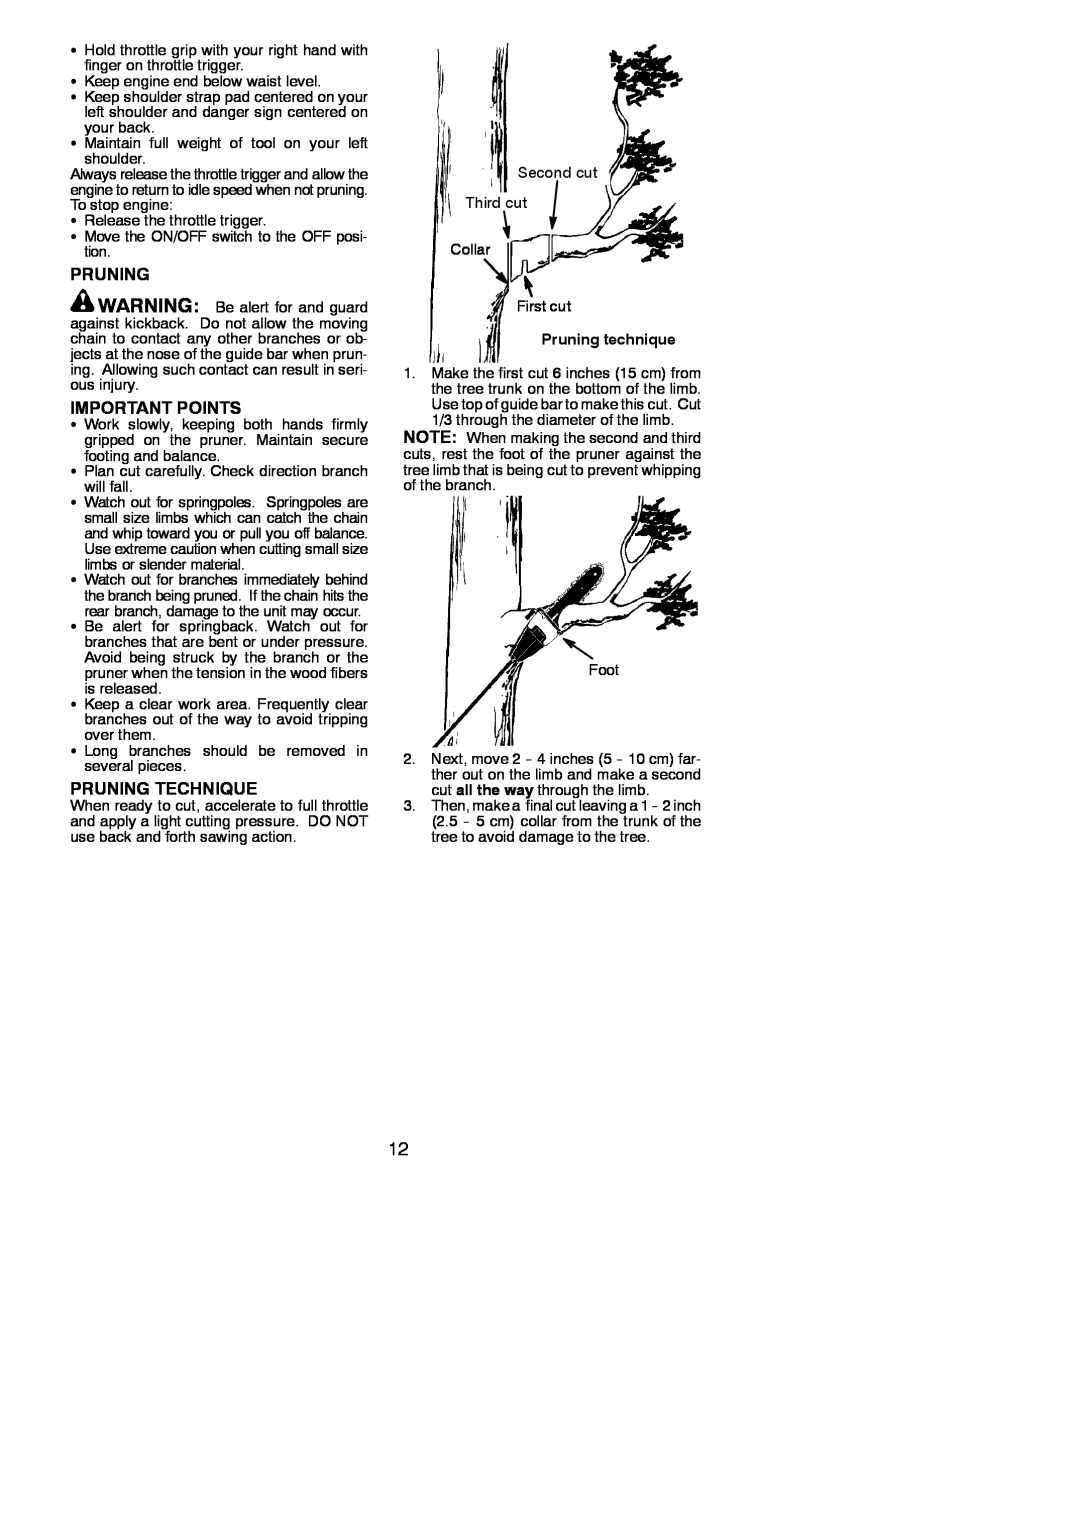 Poulan SM446E instruction manual Important Points, Pruning Technique, Pruning technique 